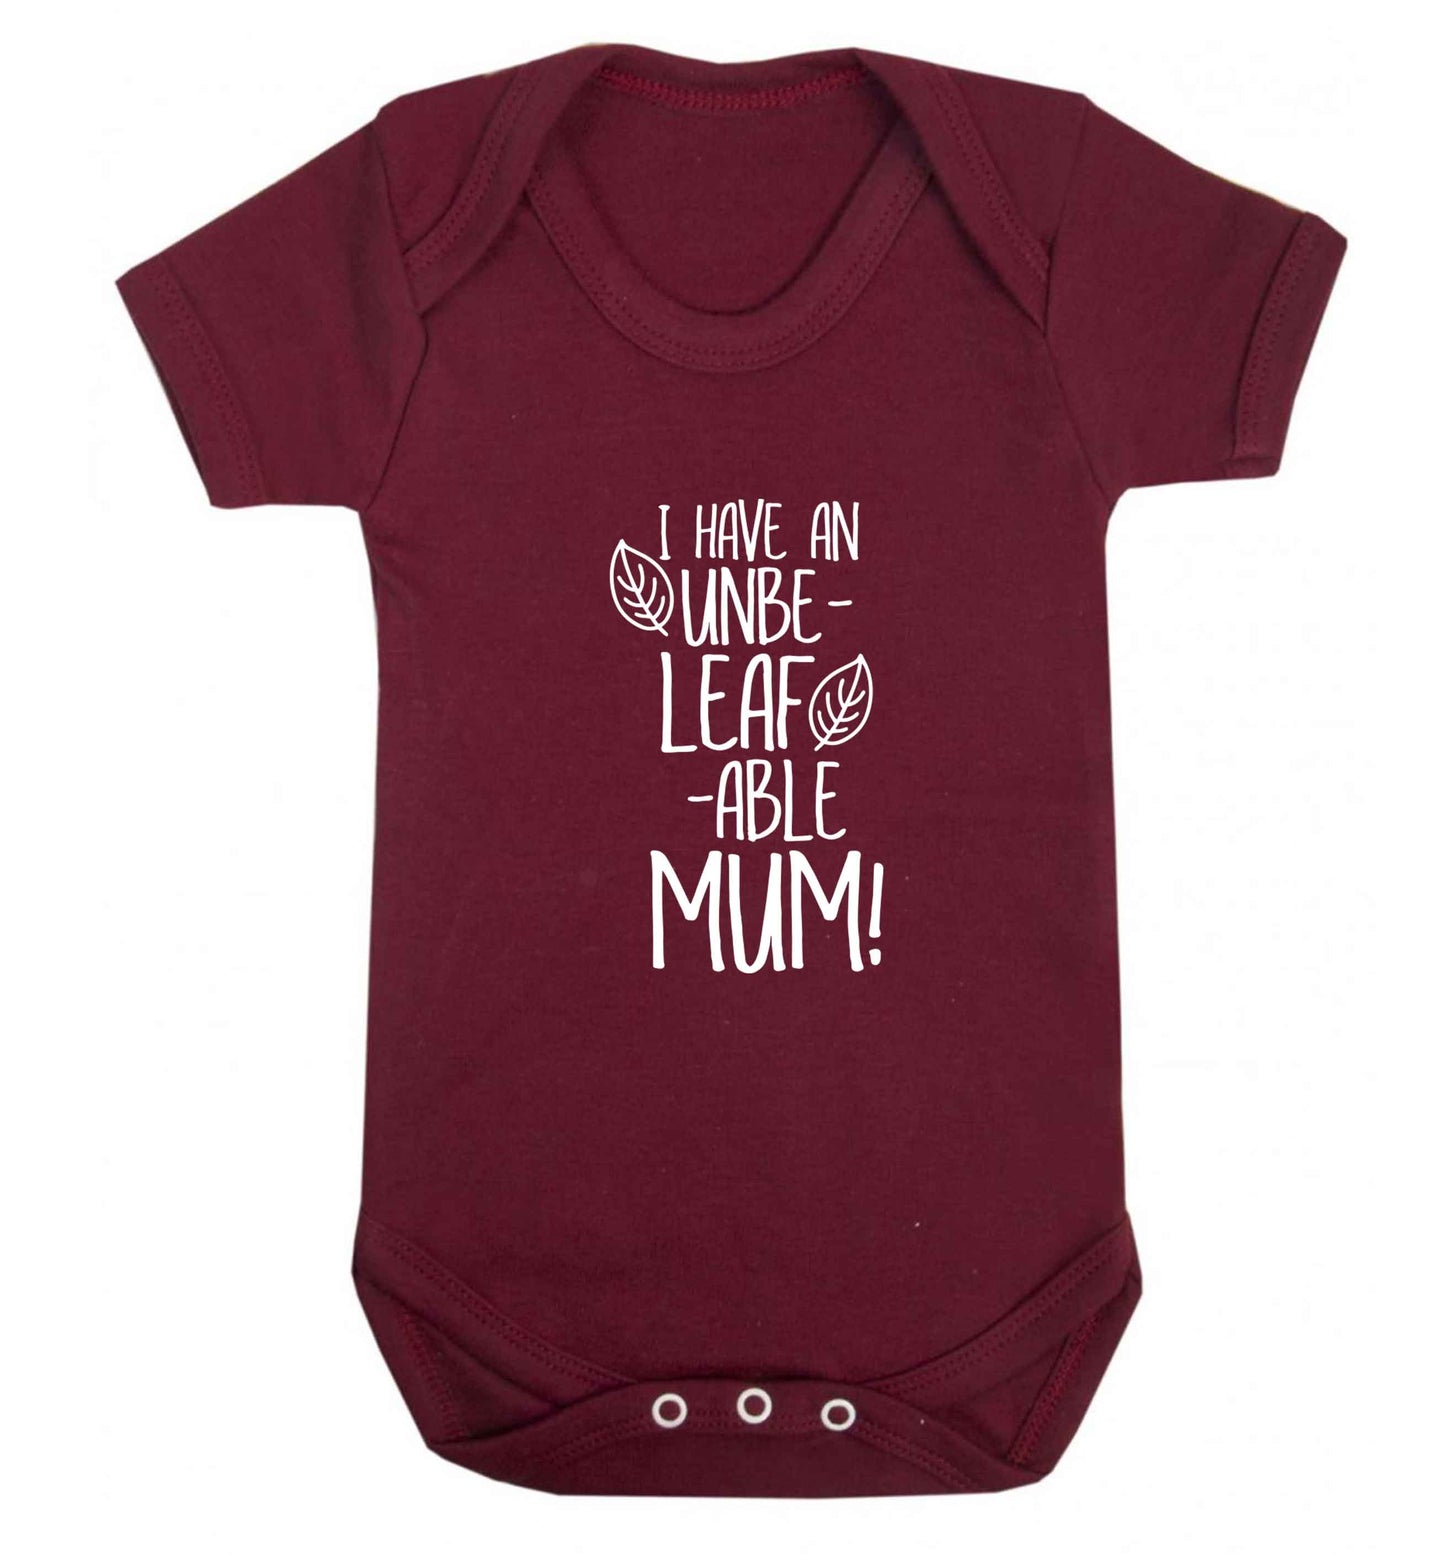 I have an unbeleafable mum! baby vest maroon 18-24 months